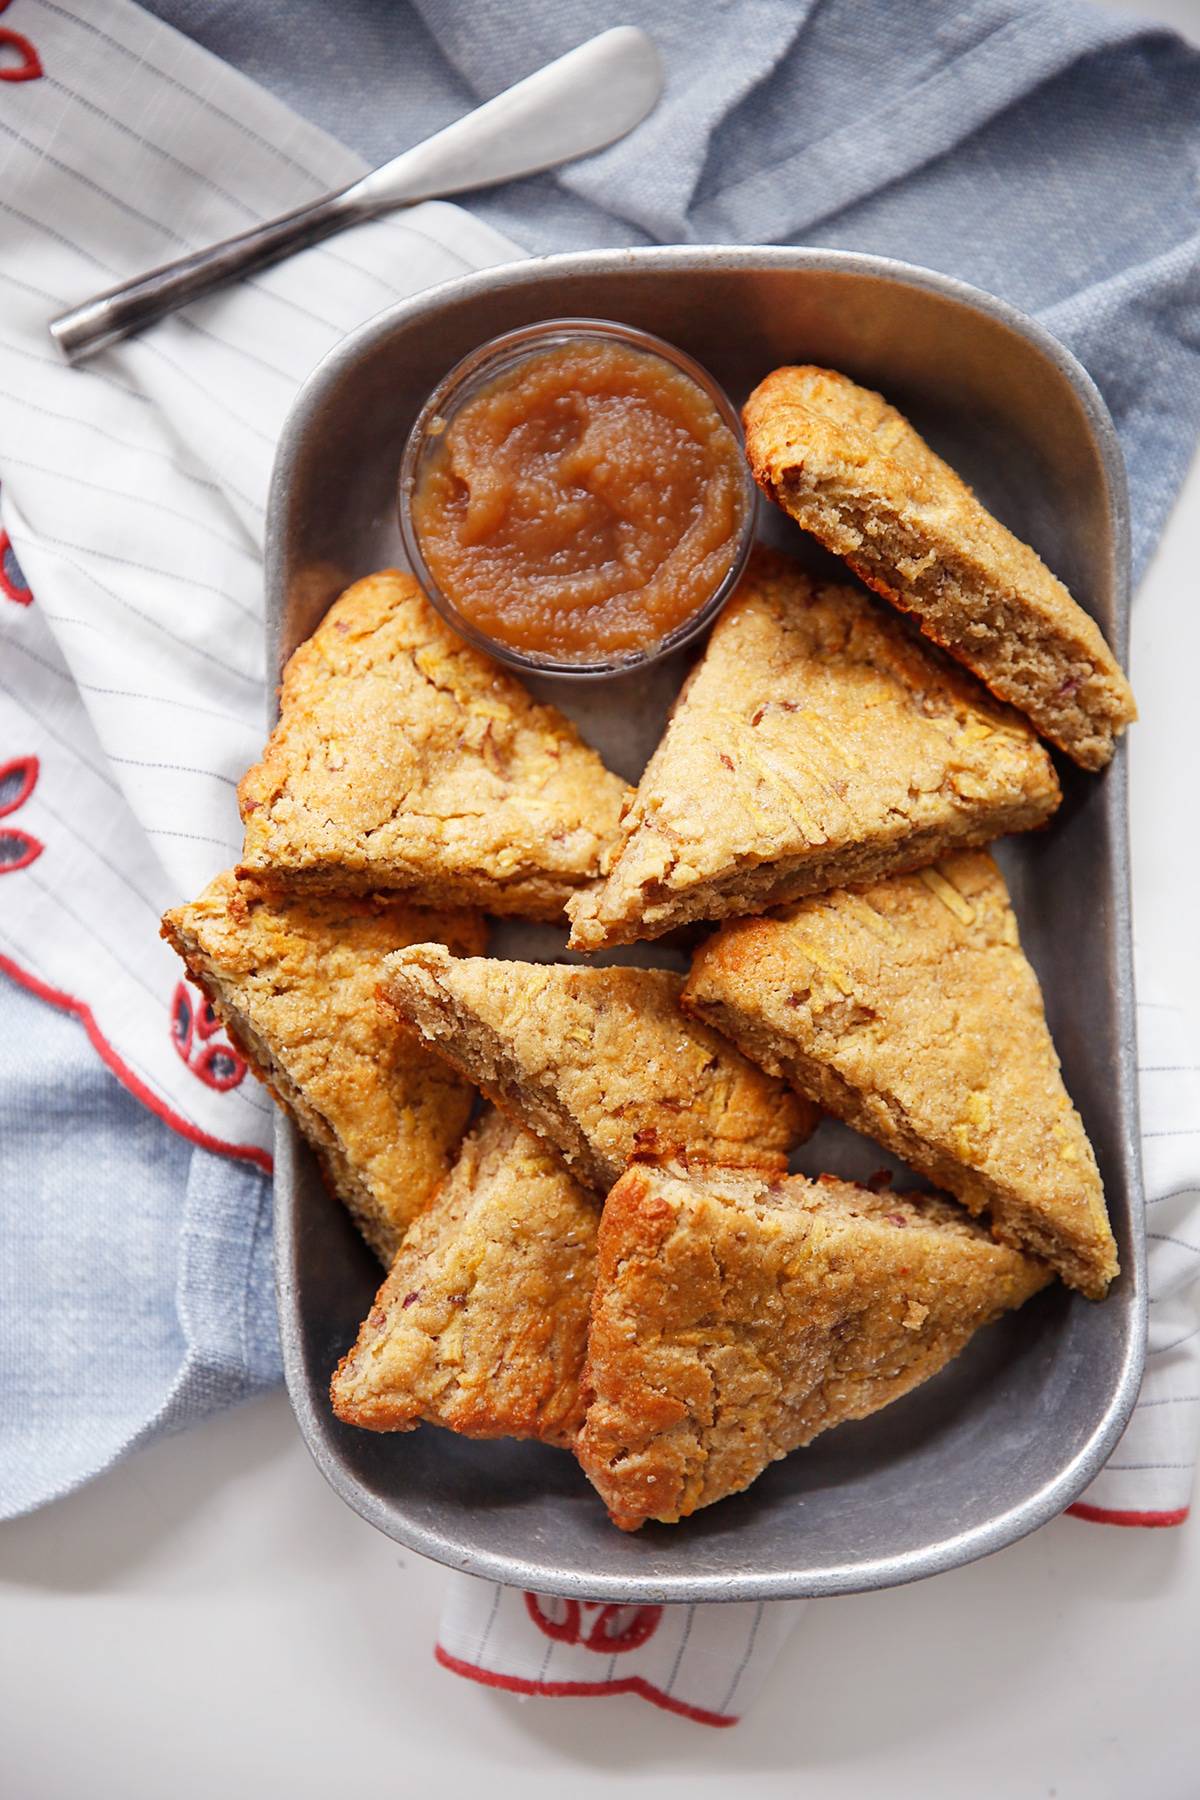 Gluten-free scones with apple butter.